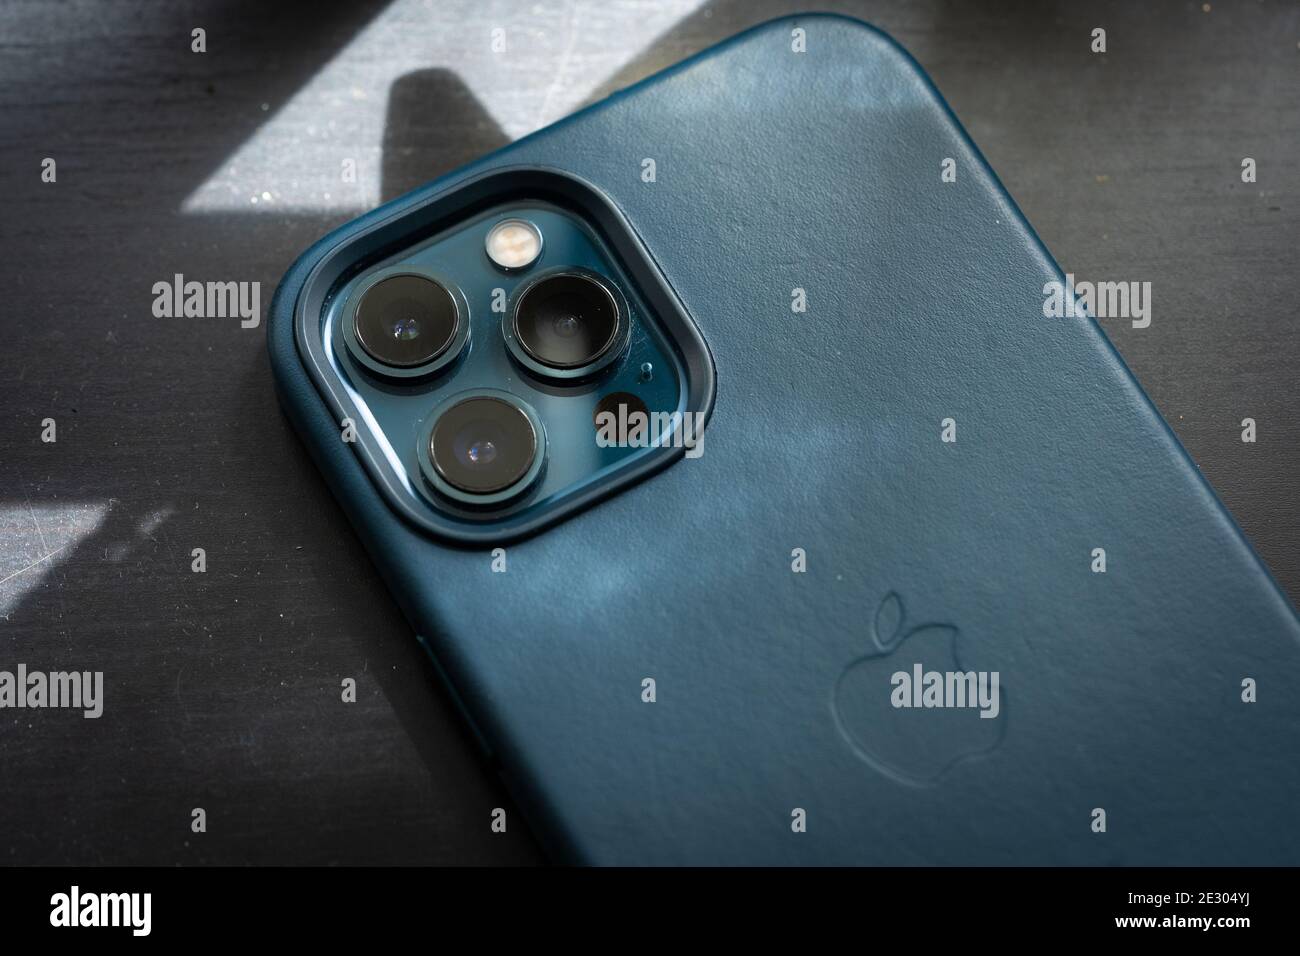 The New Iphone 12 Pro Max Pacific Blue Colour Stock Photo Alamy